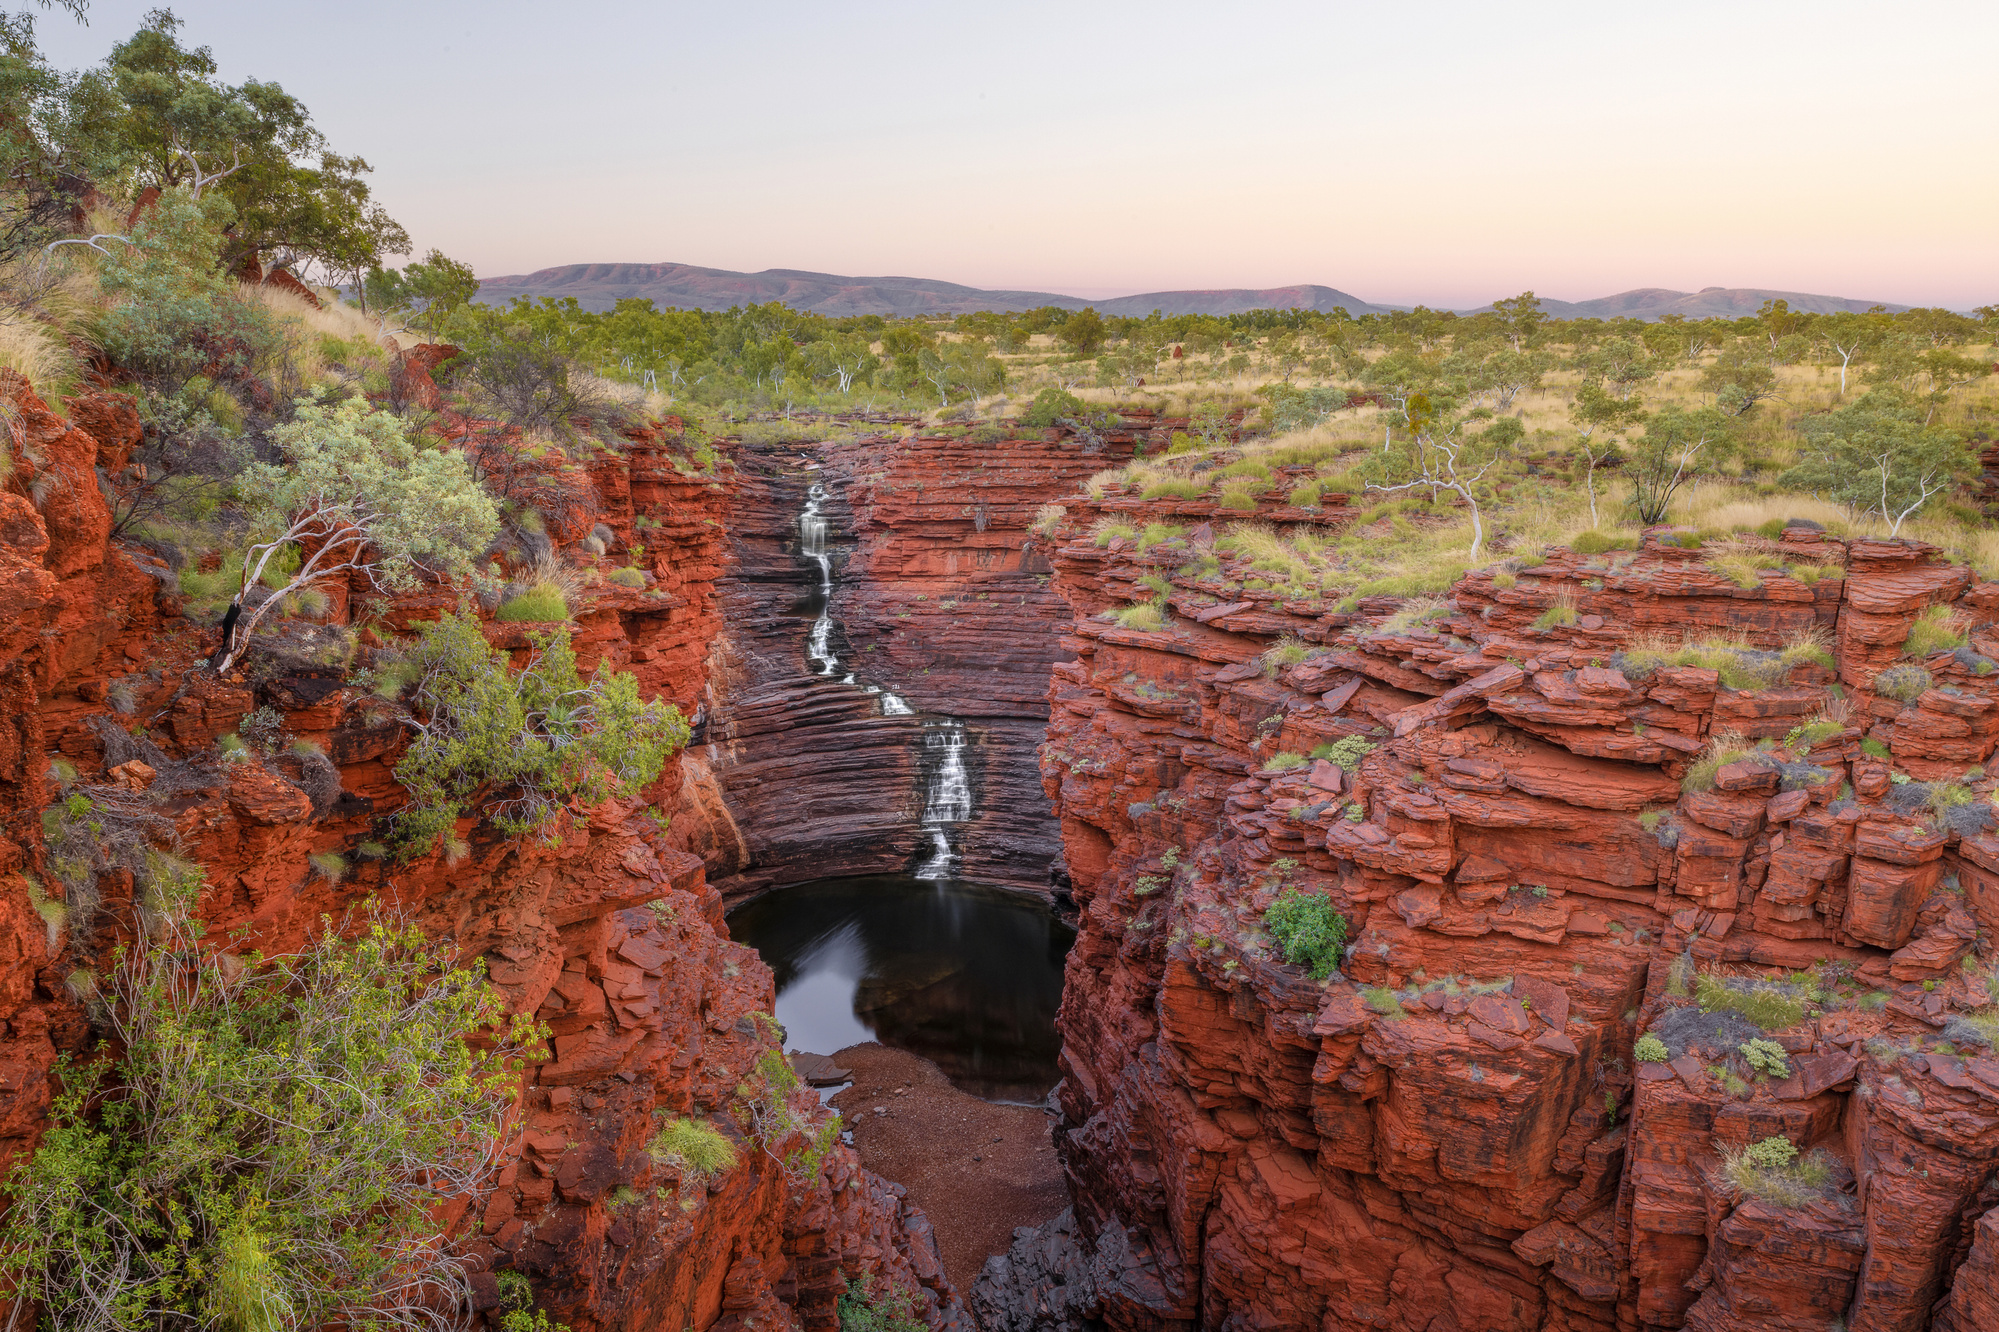 A view from the Joffre Gorge lookout in Karijini National Park.